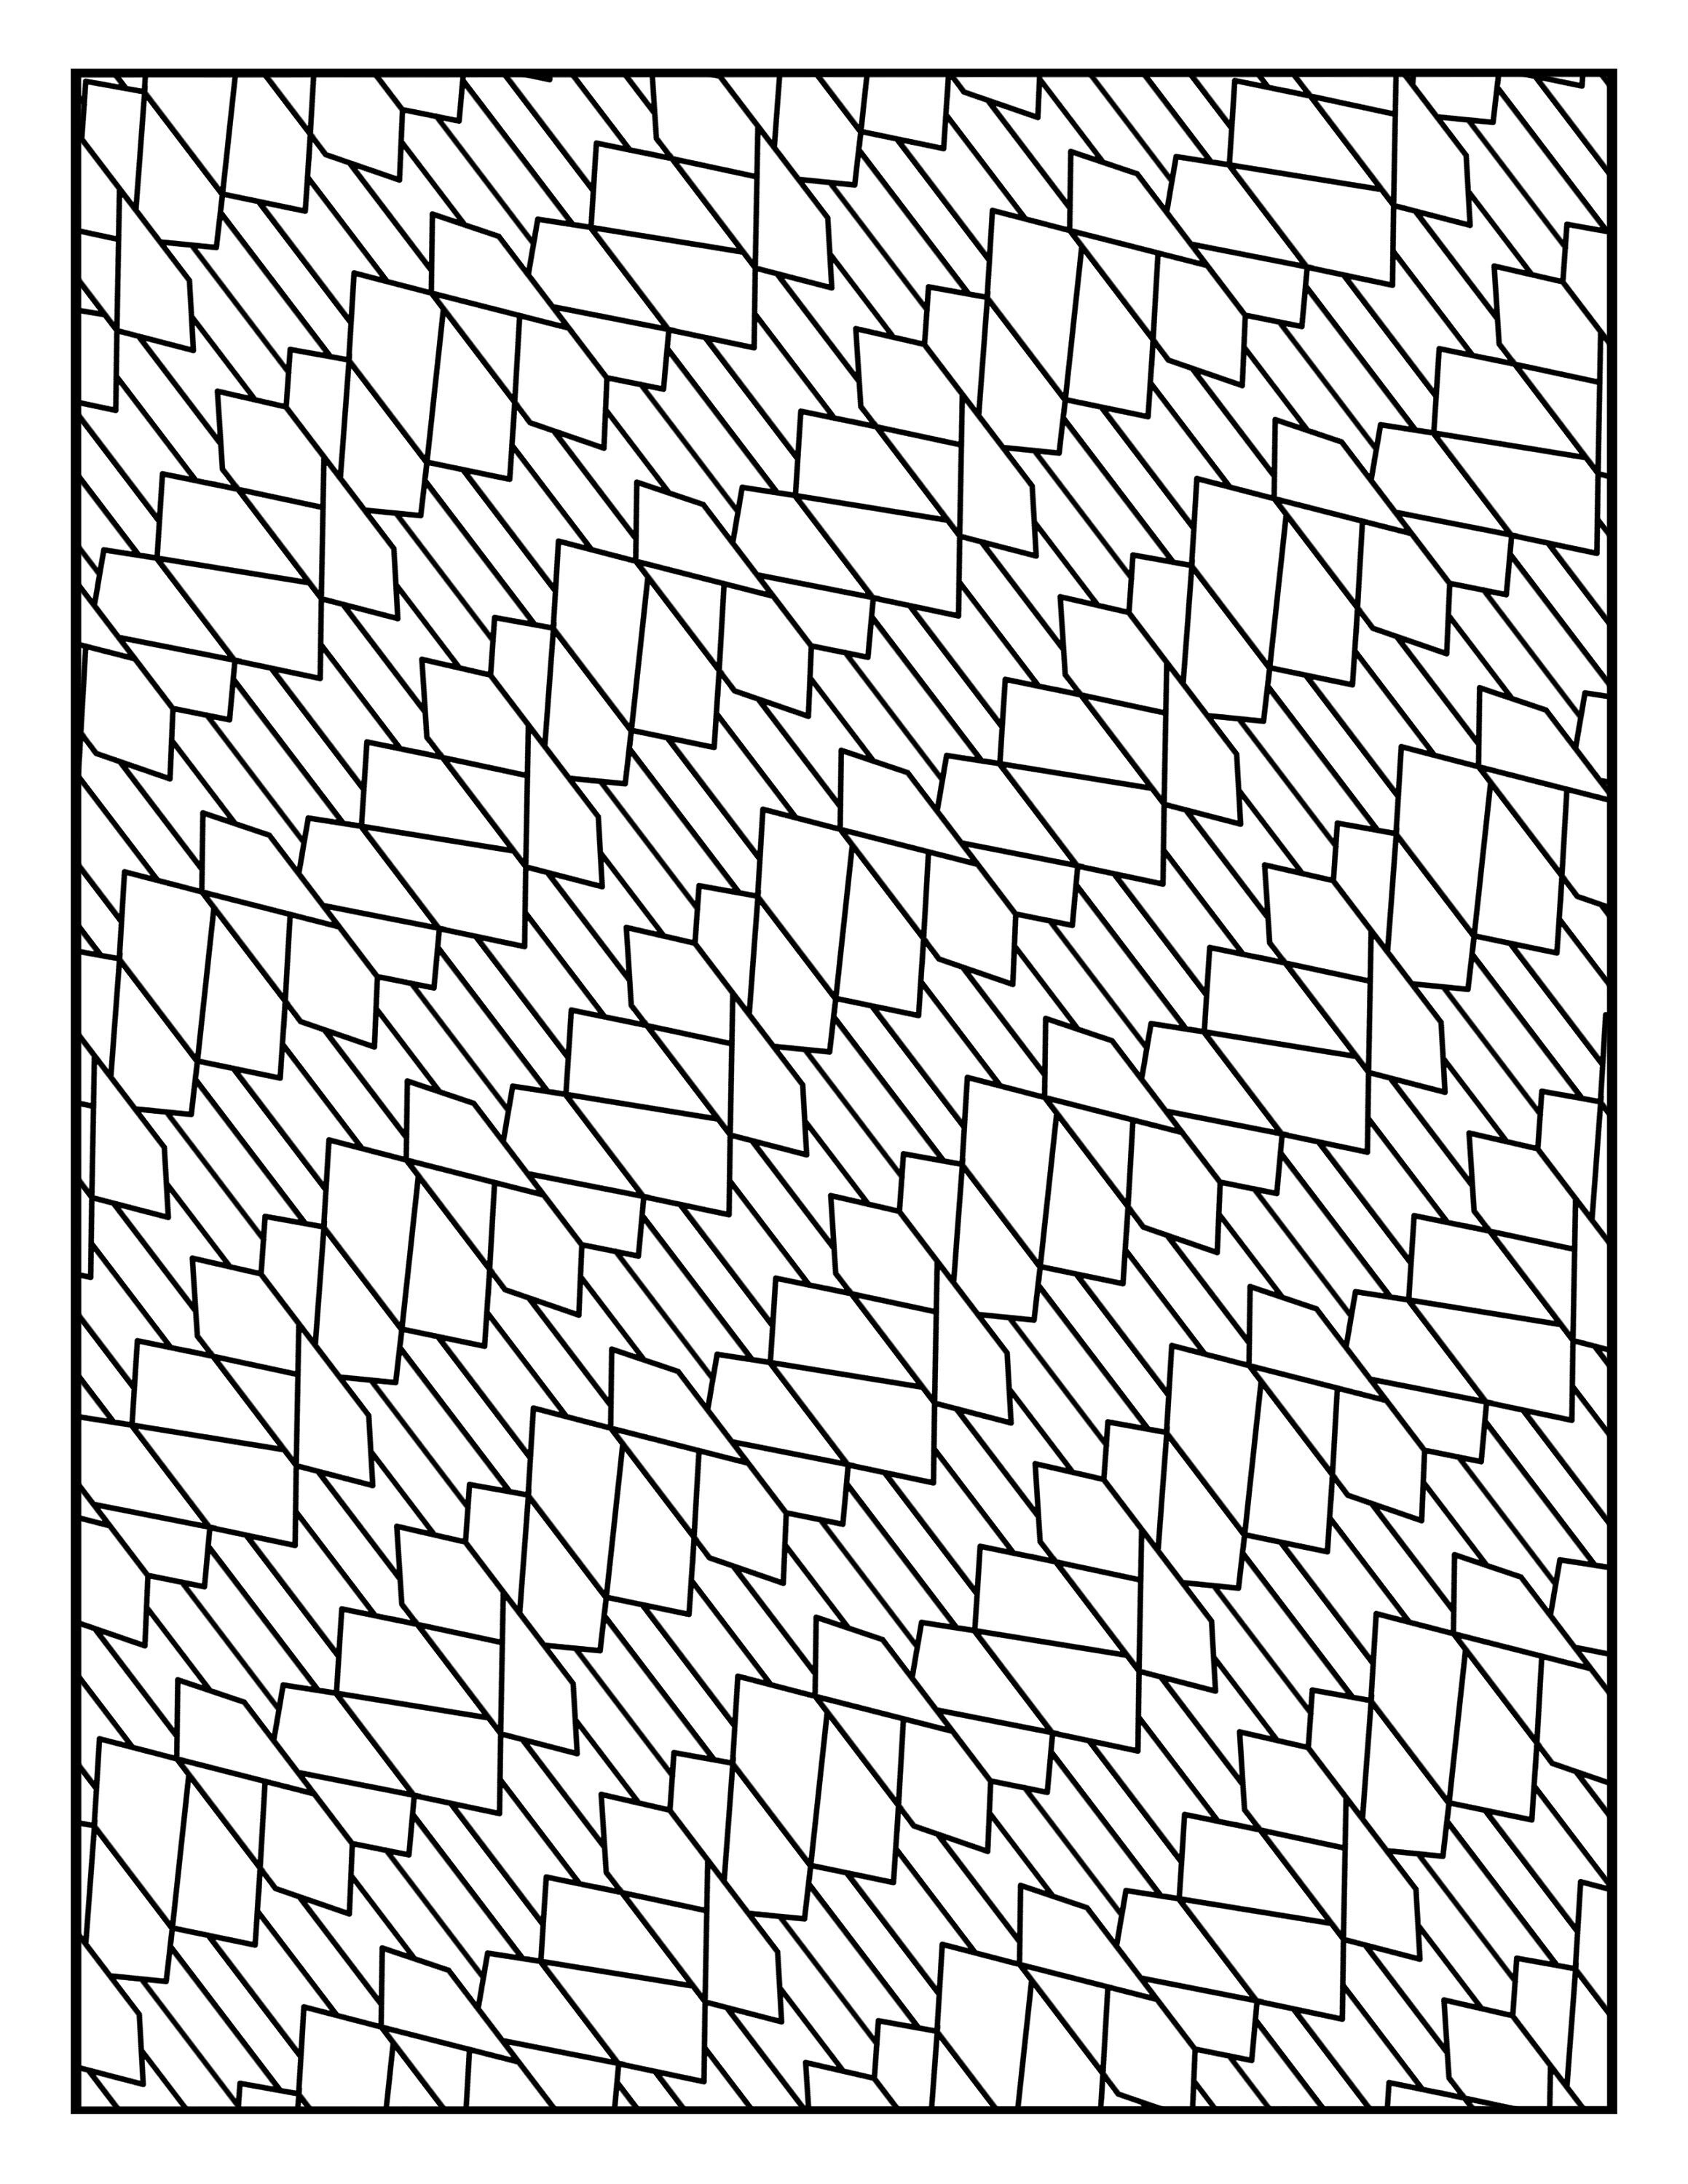 Coloring page geometric lines squares rectangles repeating pattern printable